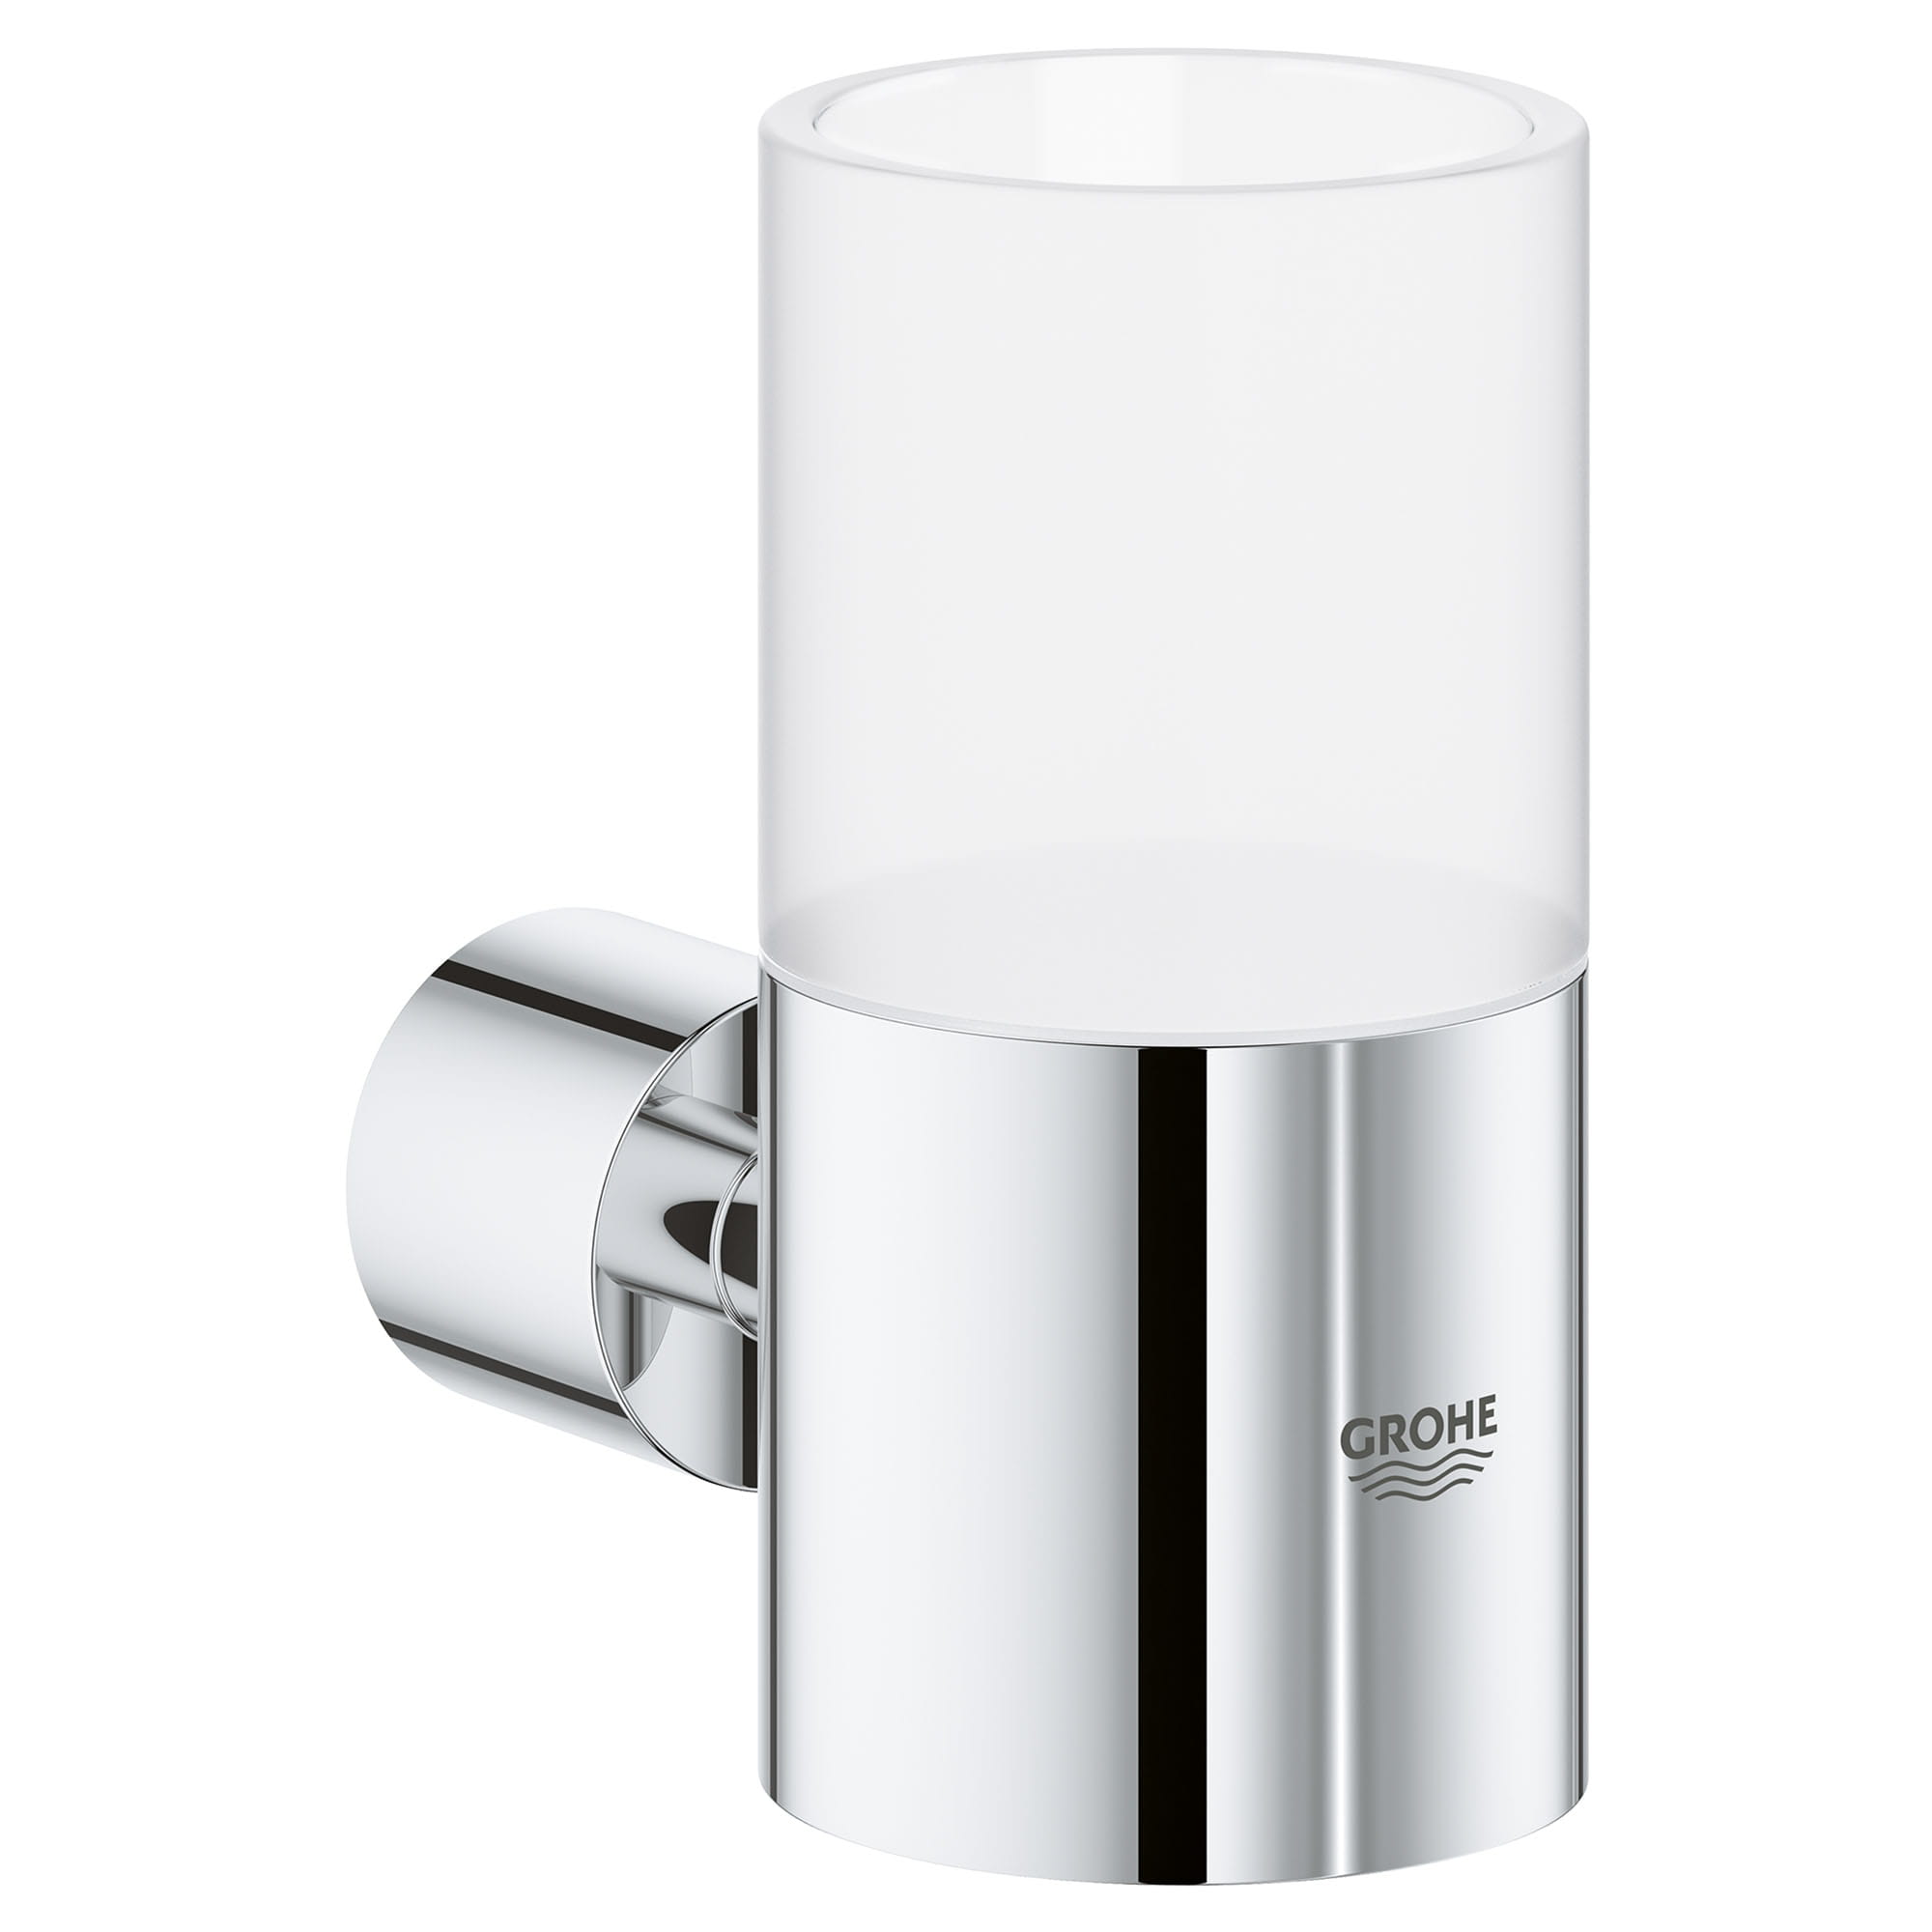 Support pour gobelet GROHE CHROME